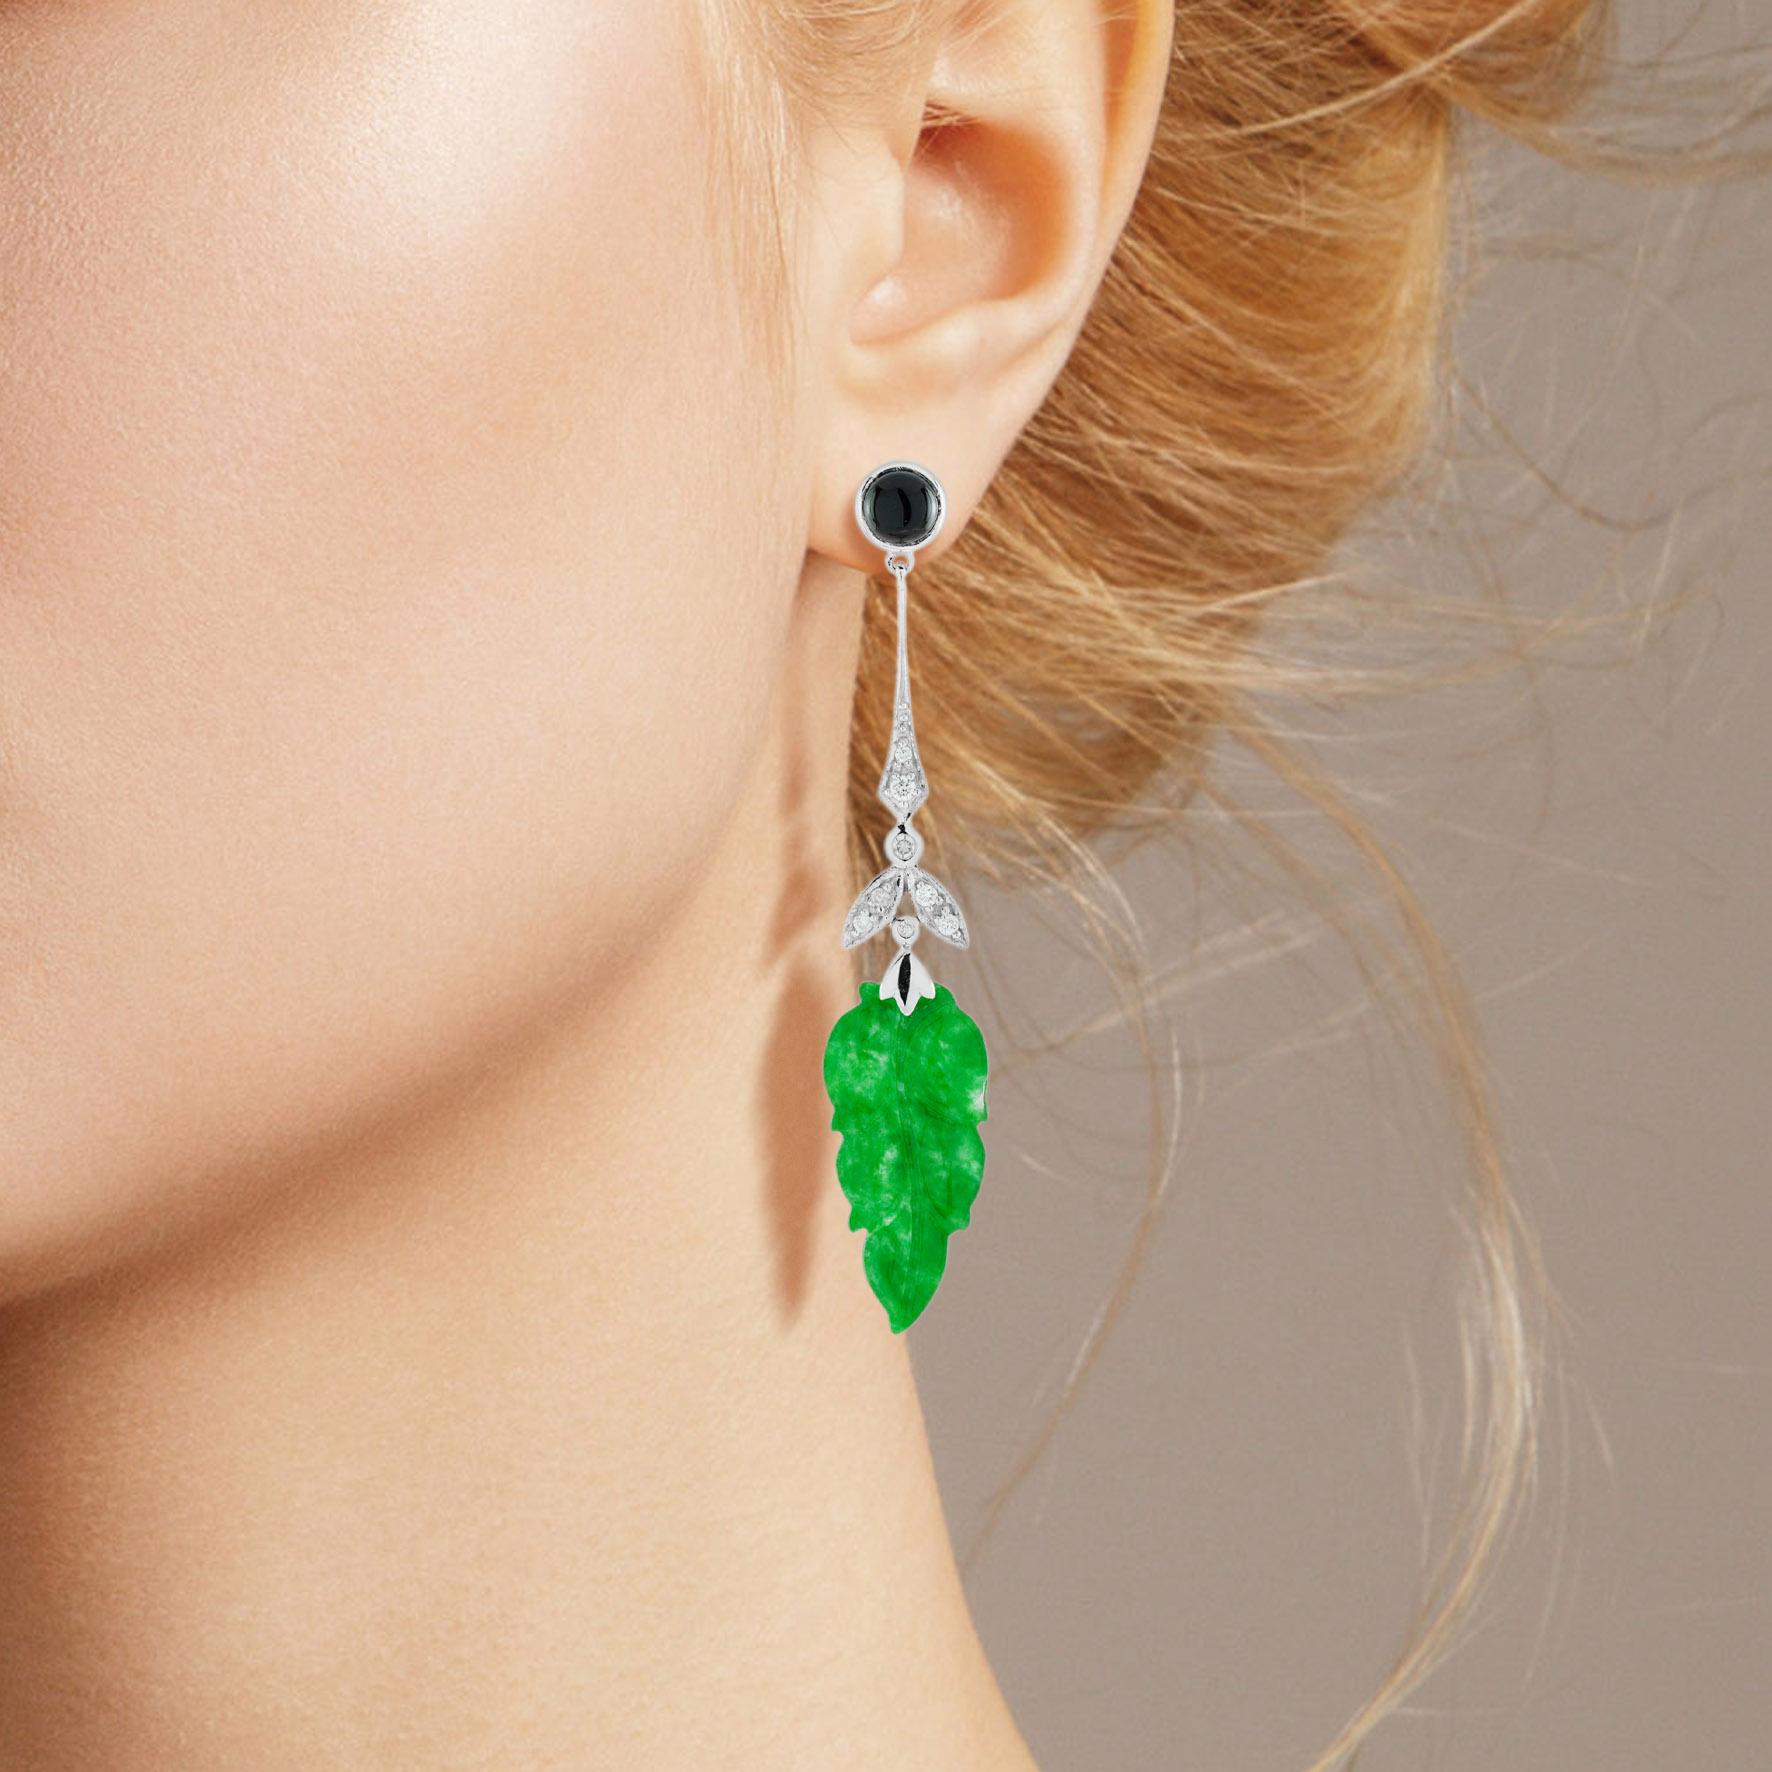 The natural jade in these lovely earrings has some very special shape. Both pieces have a strong green color and well leaf carvings. The jade is suspended in a 9k white gold setting with diamond leaf and round onyx on the top. The earrings transfer